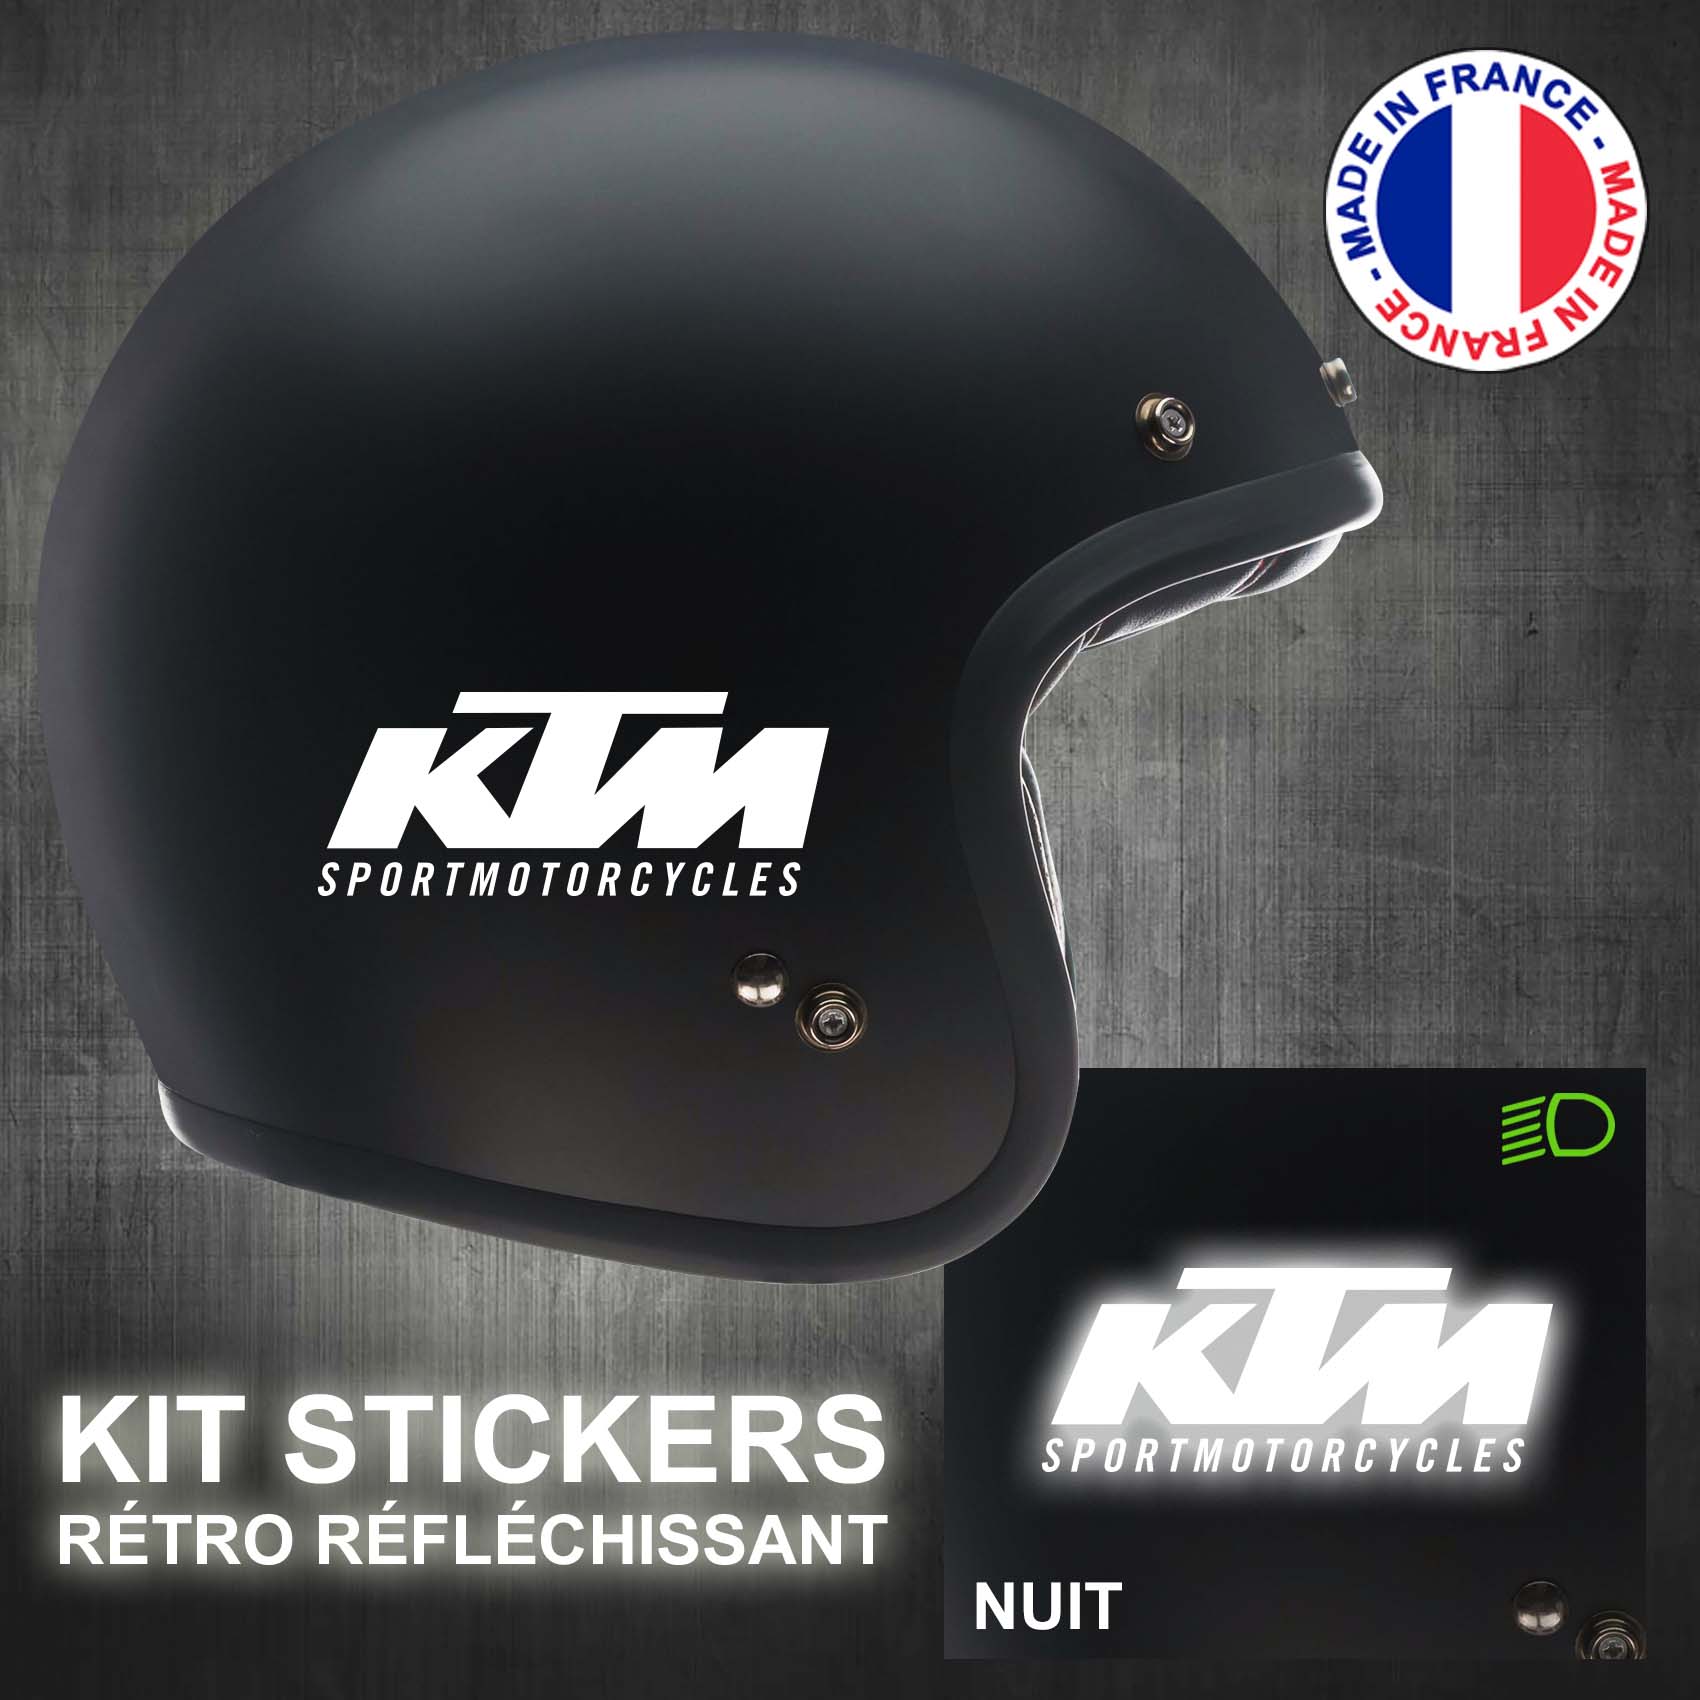 stickers-casque-moto-ktm-sport-ref1-retro-reflechissant-autocollant-noir-moto-velo-tuning-racing-route-sticker-casques-adhesif-scooter-nuit-securite-decals-personnalise-personnalisable-min